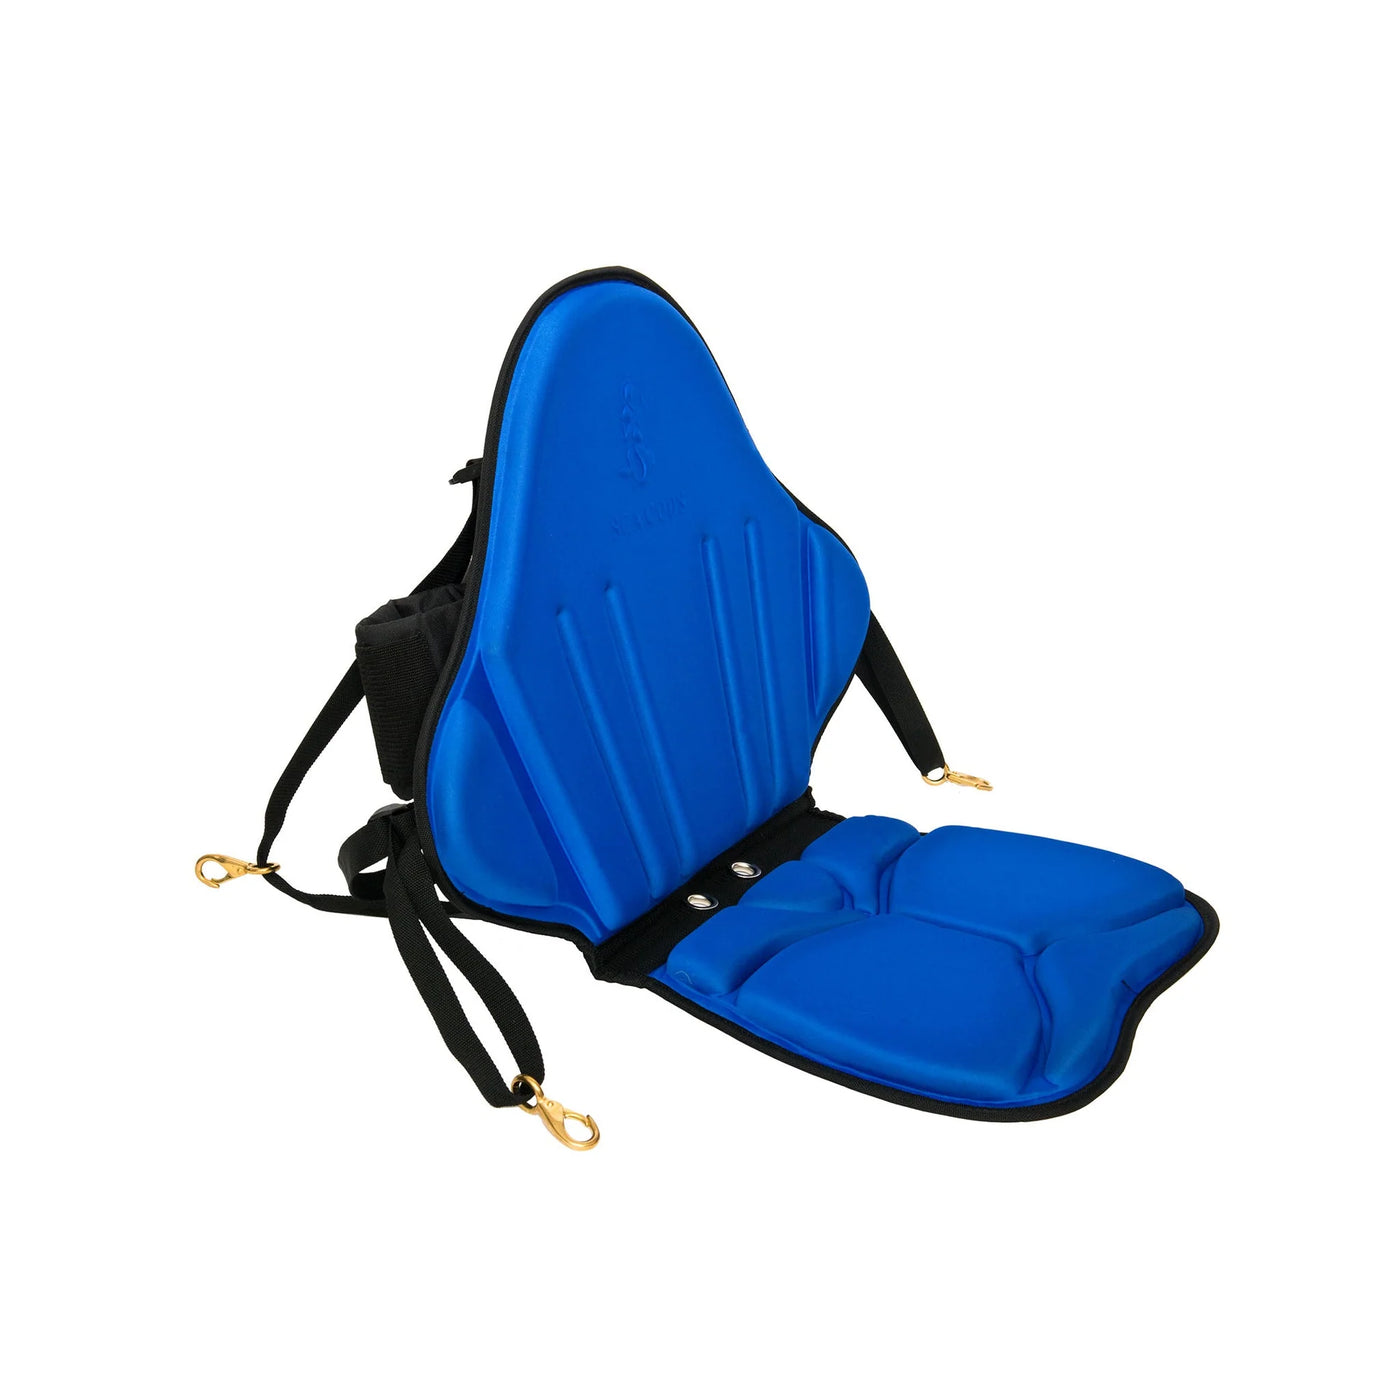 Blue kayak seat attachment for stand up paddle boards.